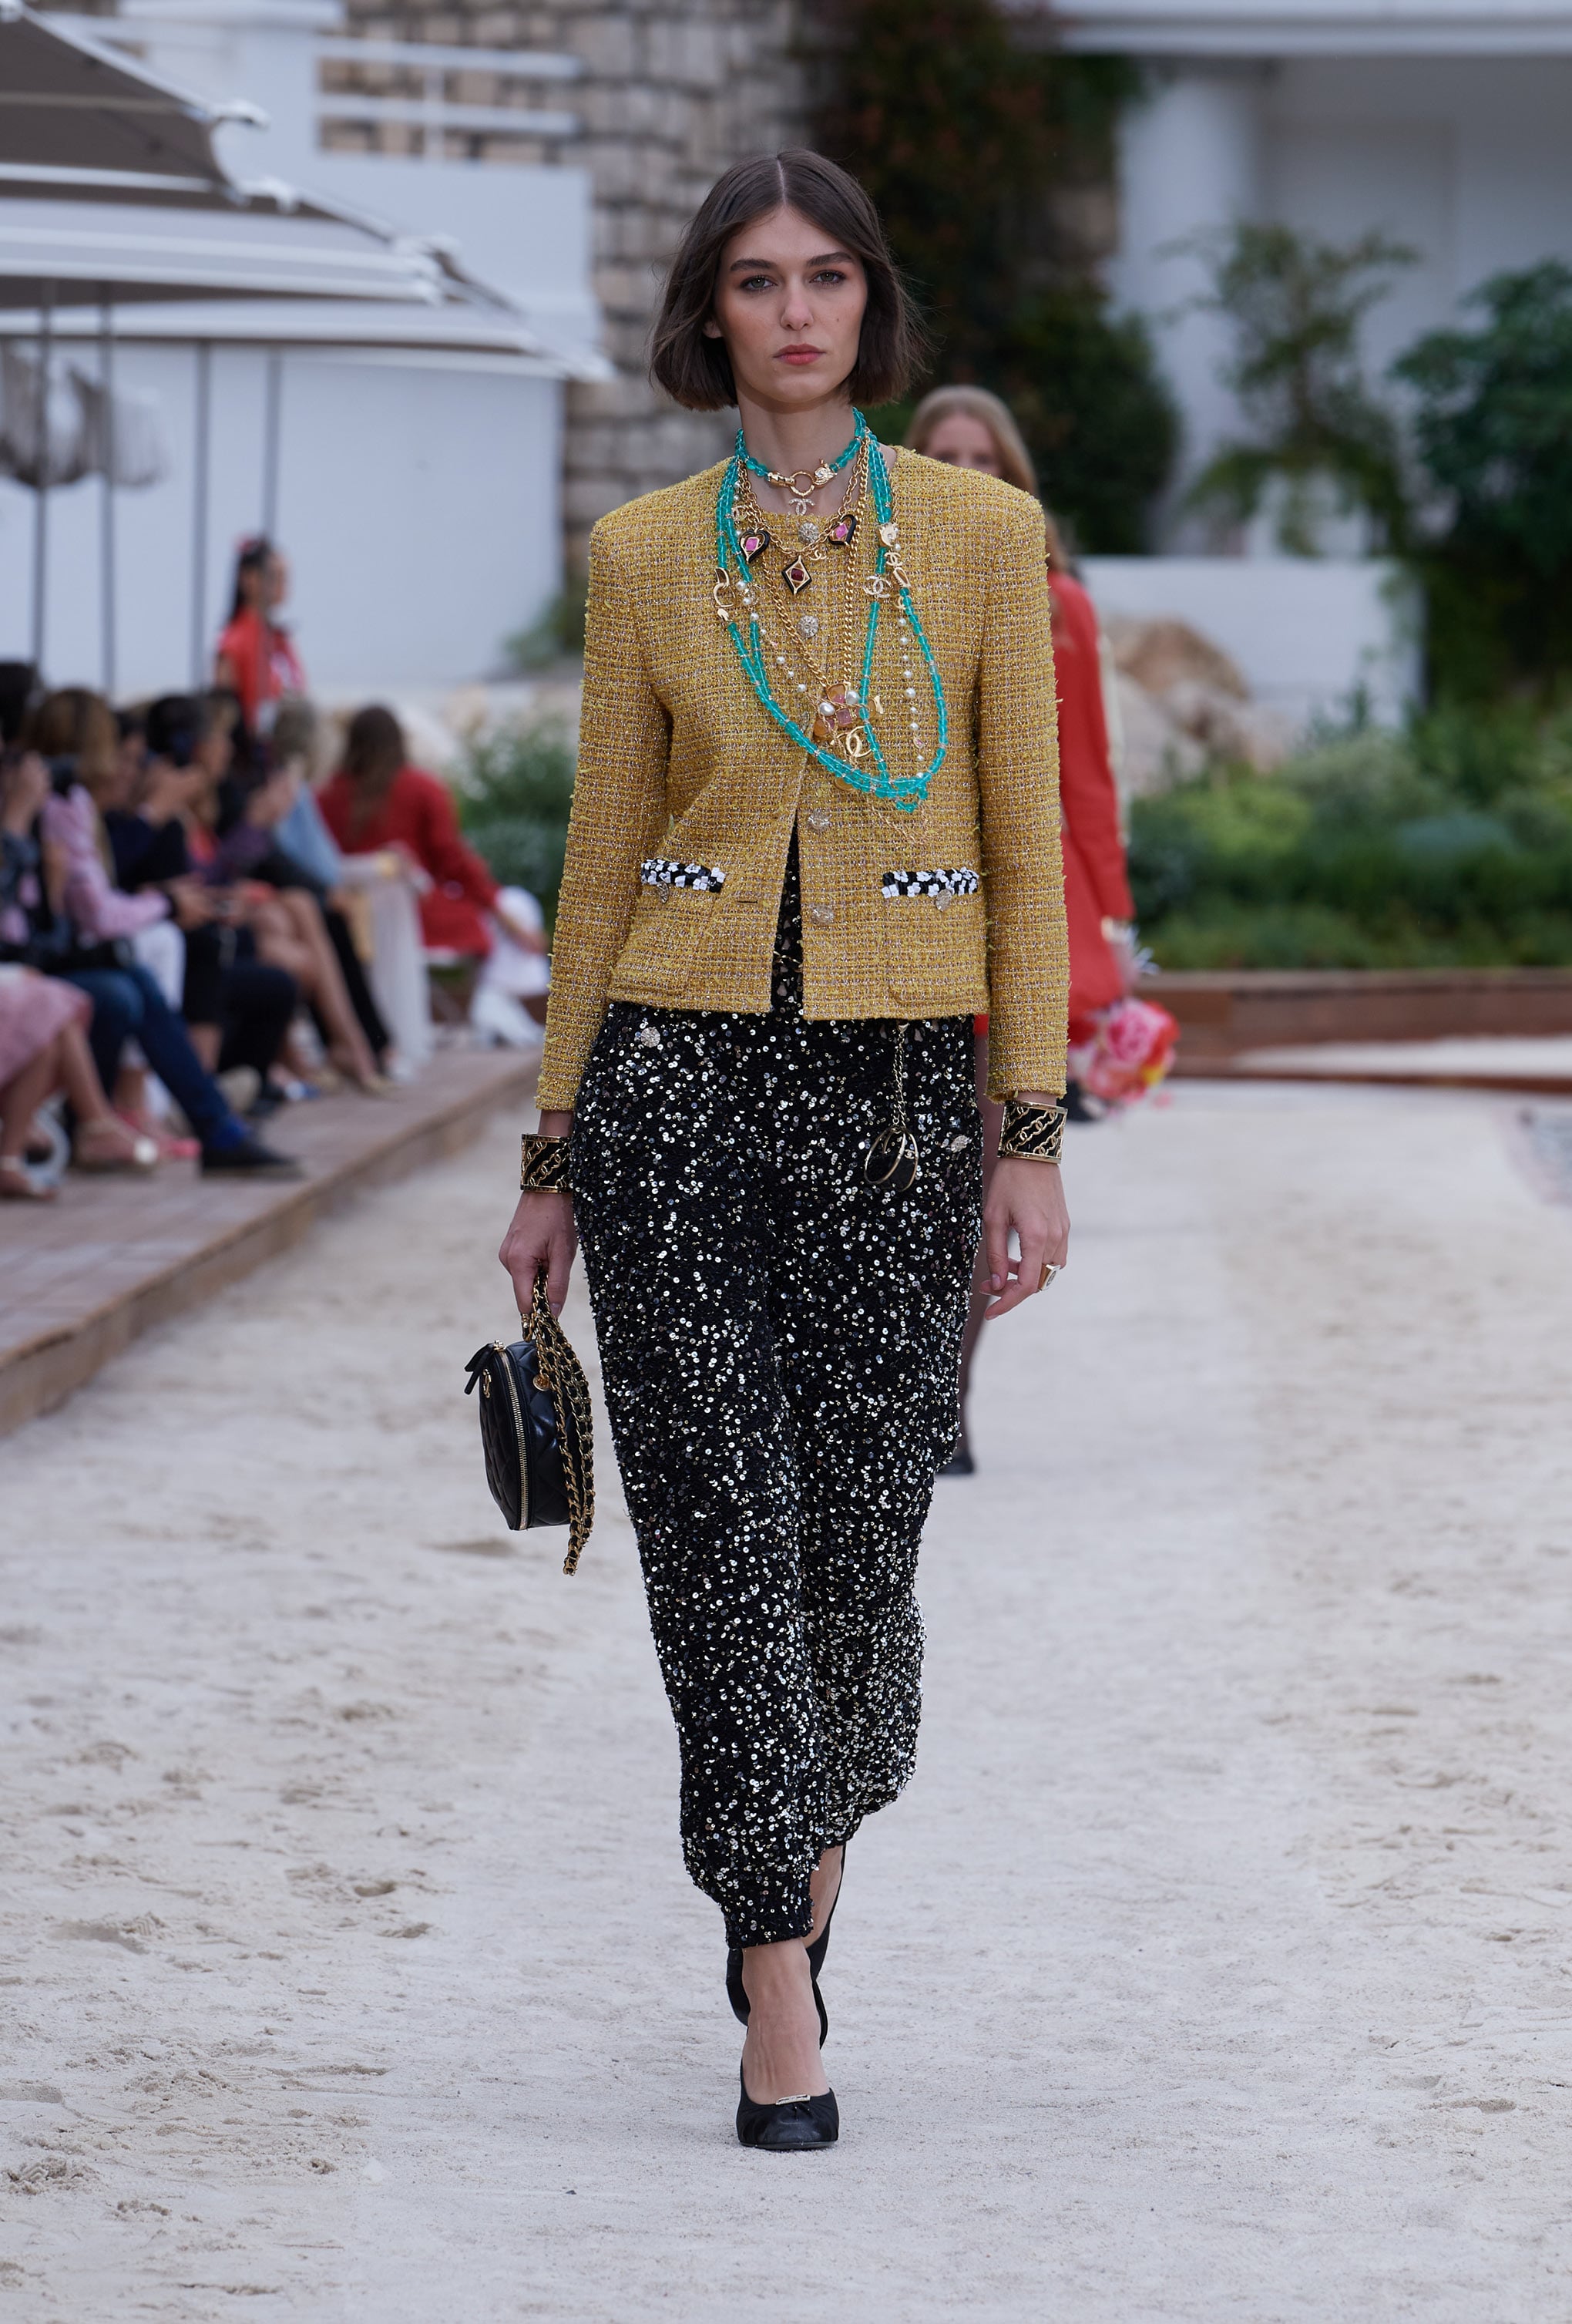 Chanel's New Bouclé Jackets Turn 'Classic' On Its Head